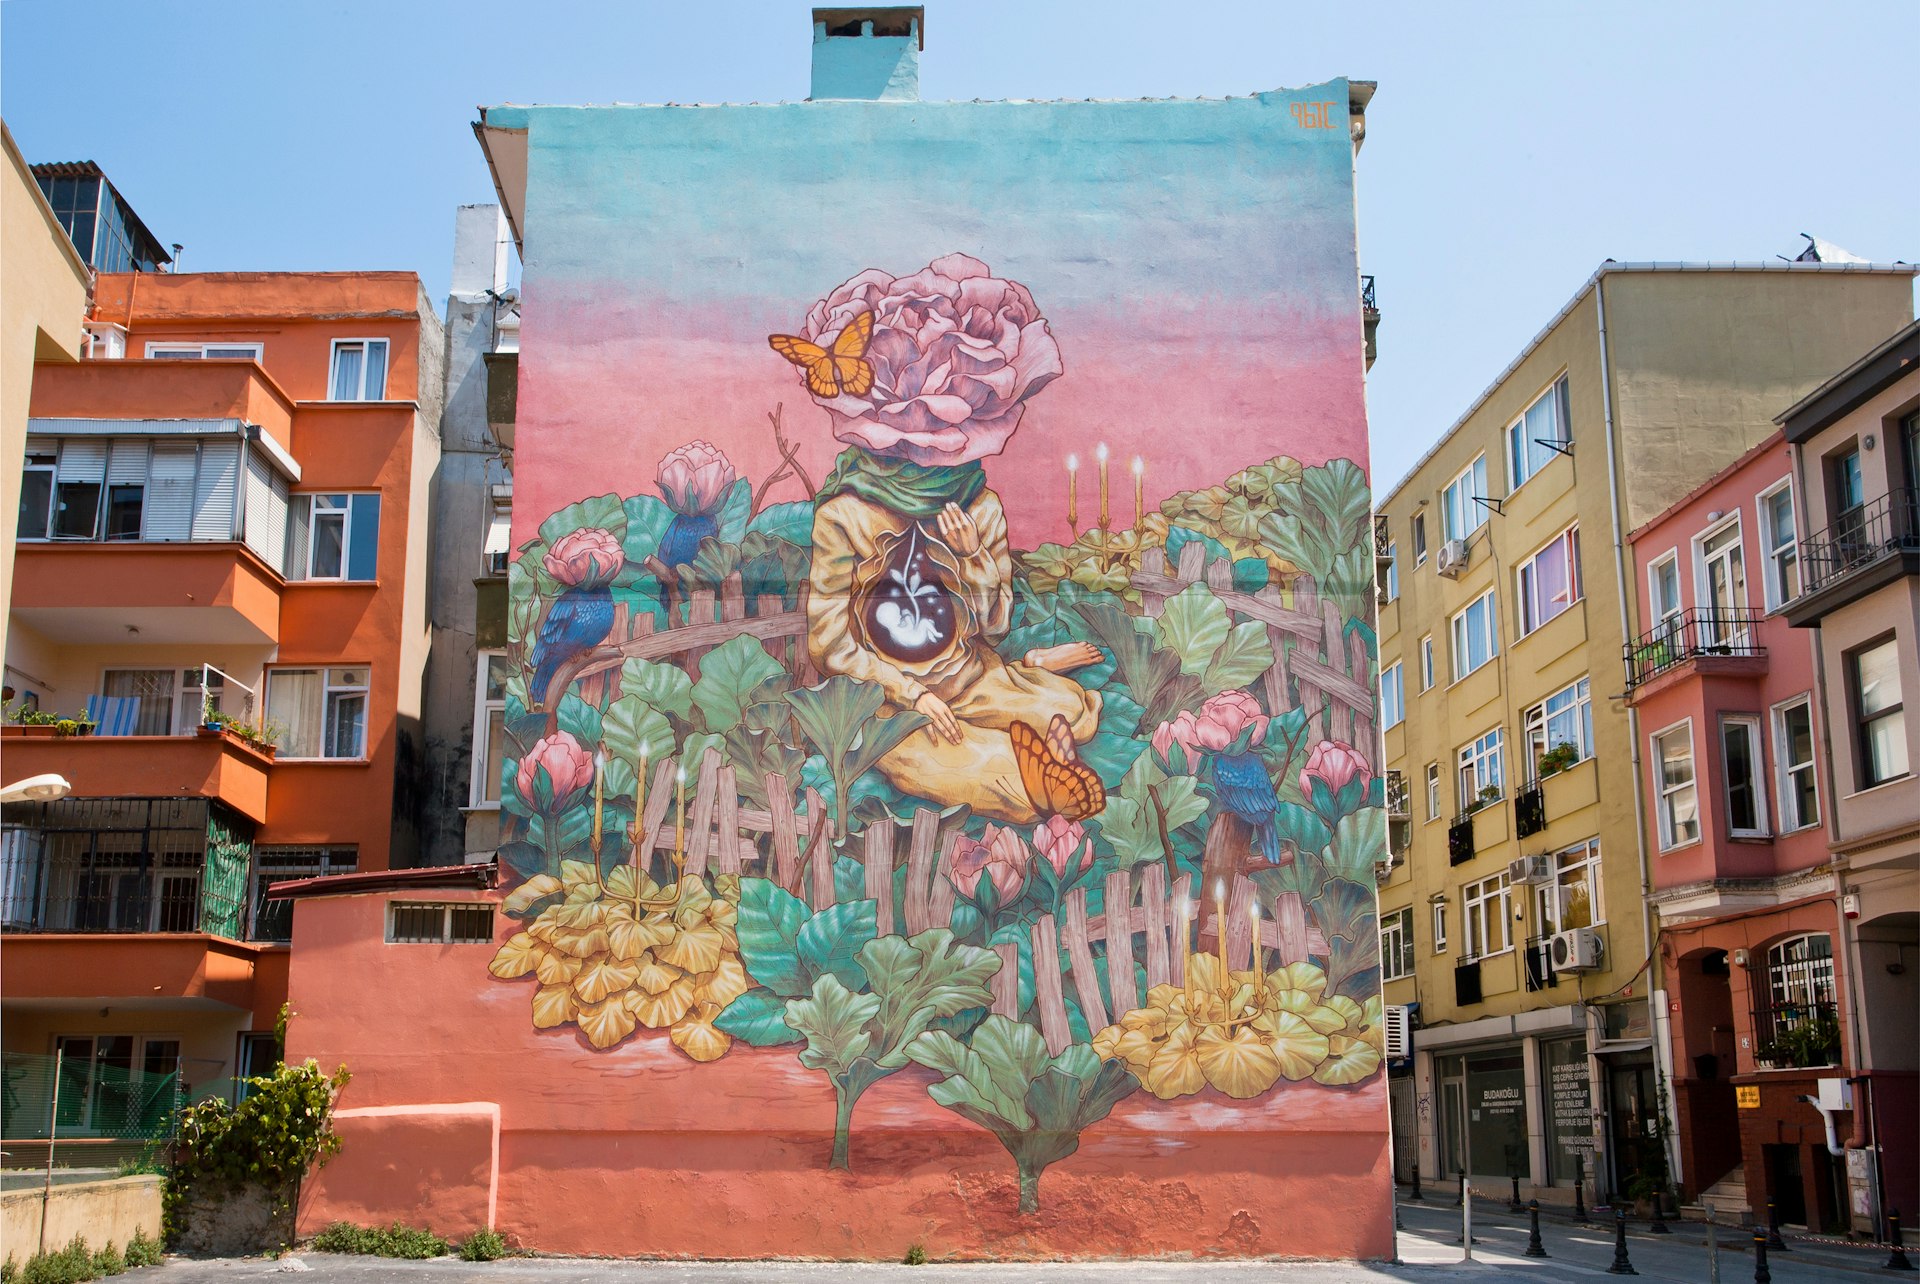 The side of a building is covered in a massive mural depicting a figure surrounded by plants. Instead of a face, the figure has a pink rose